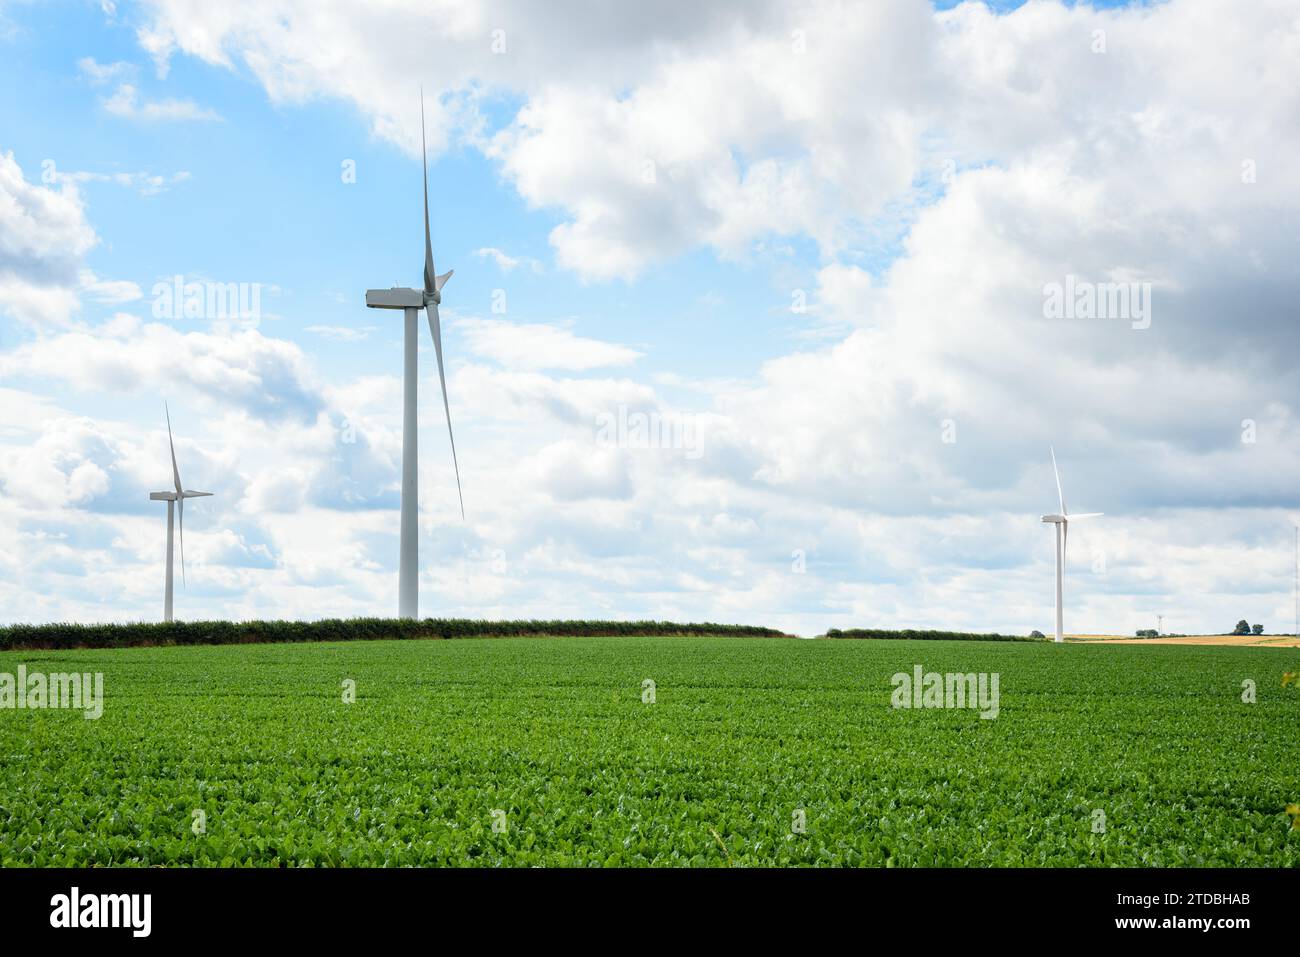 Wind farm in a rural landscape in Englad on a partly cloudy summer day Stock Photo